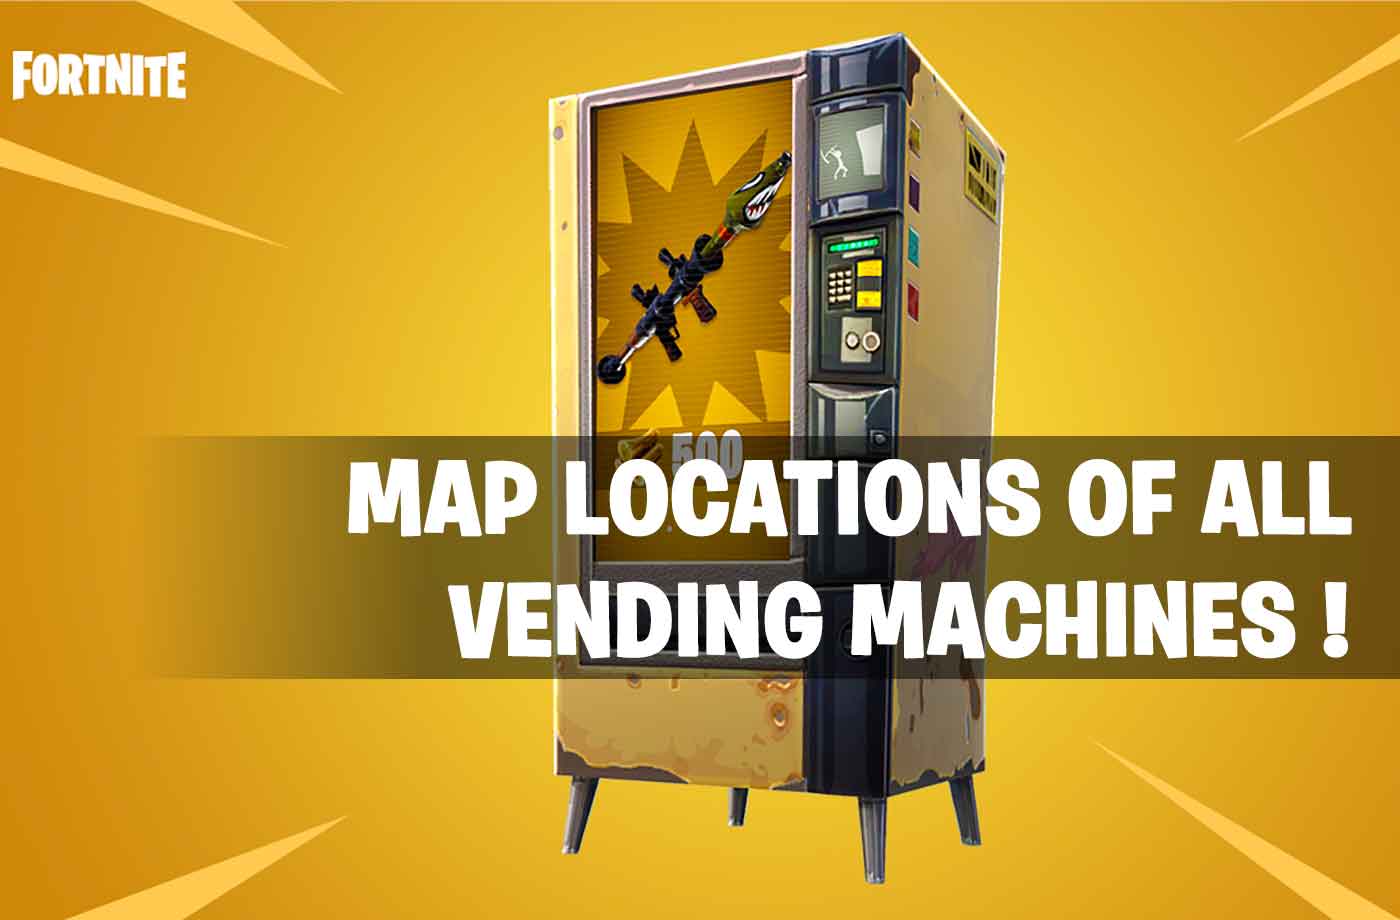 fortnite battle royale map locations of all vending machines - fortnite battle royale wiki fr